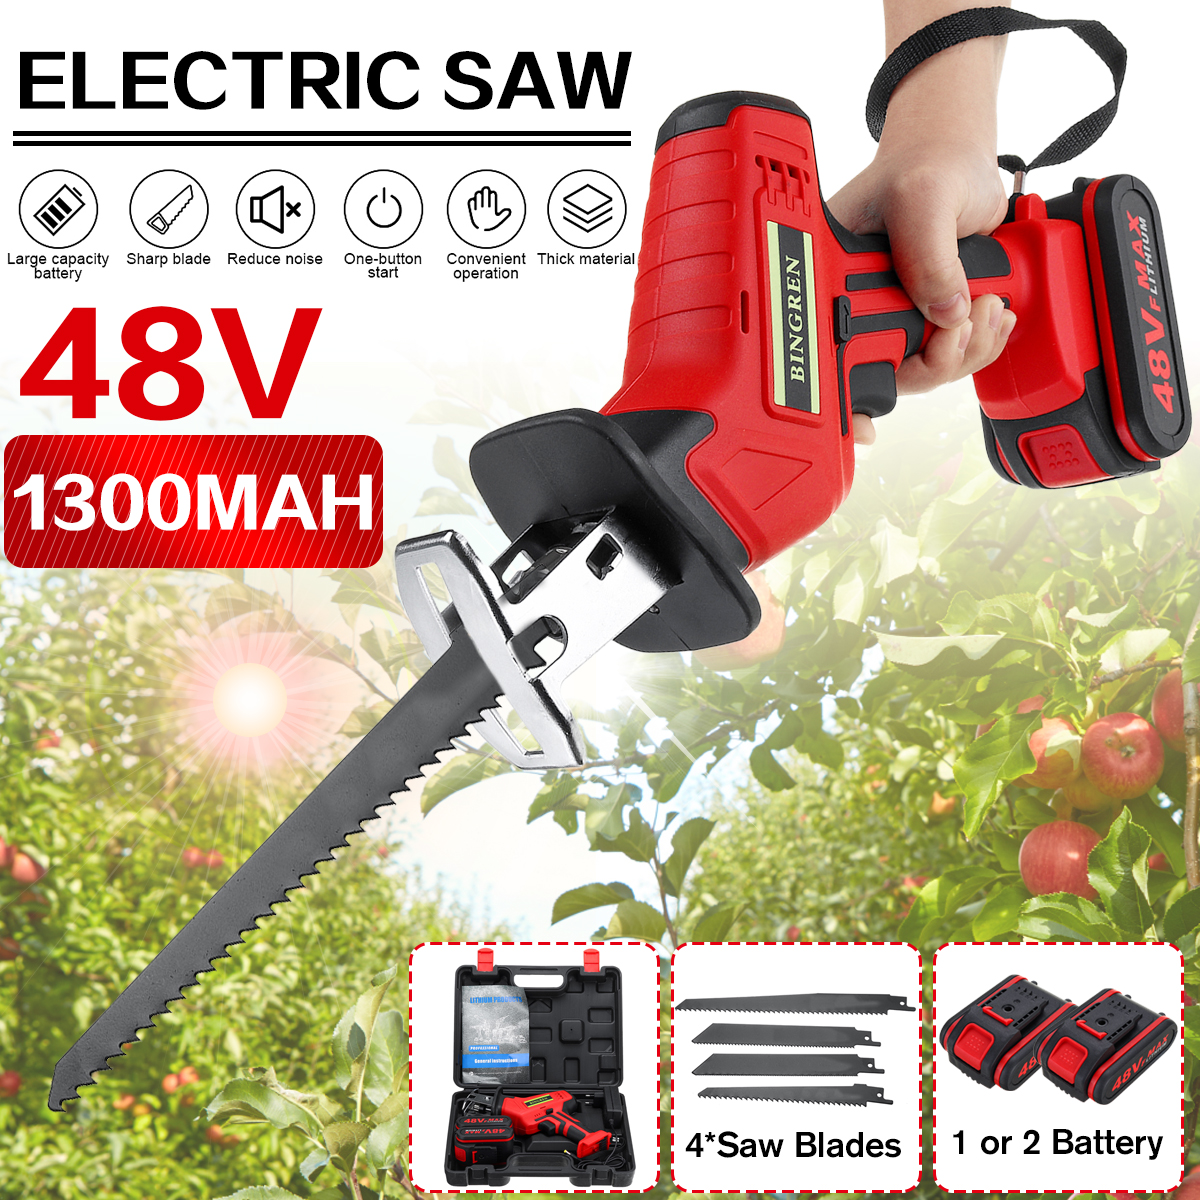 VIOLEWORKS-48VF-Electric-Cordless-Reciprocating-Saw-Chainsaw--4-Saw-Blades-Metal-Cutting-Woodworking-1804529-1